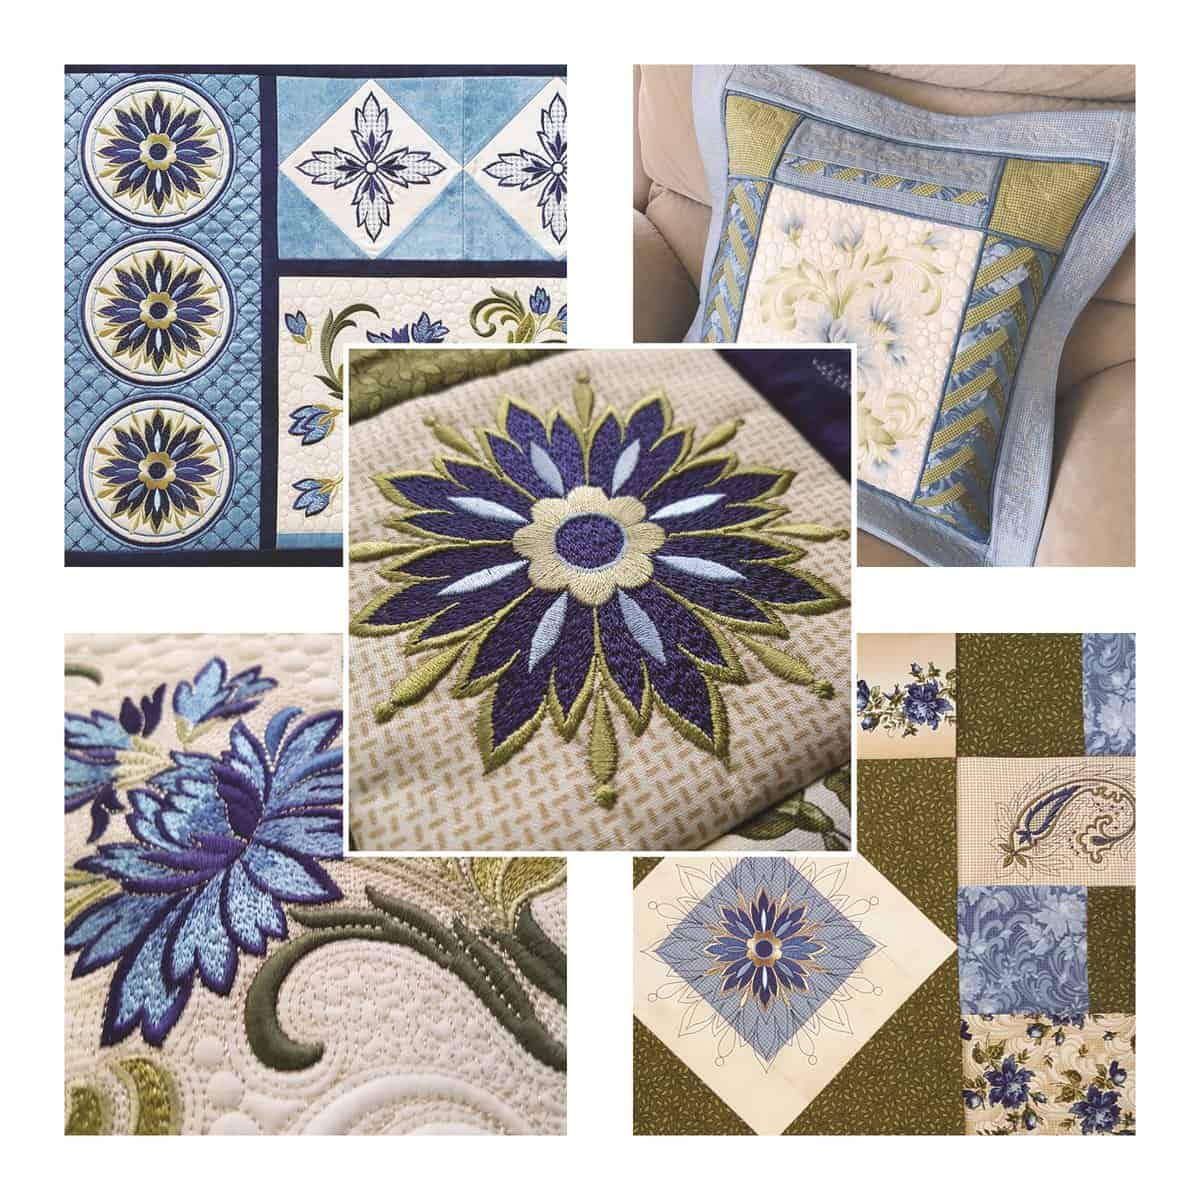 Zundt Designs – Paisley Fields | Handcrafters House